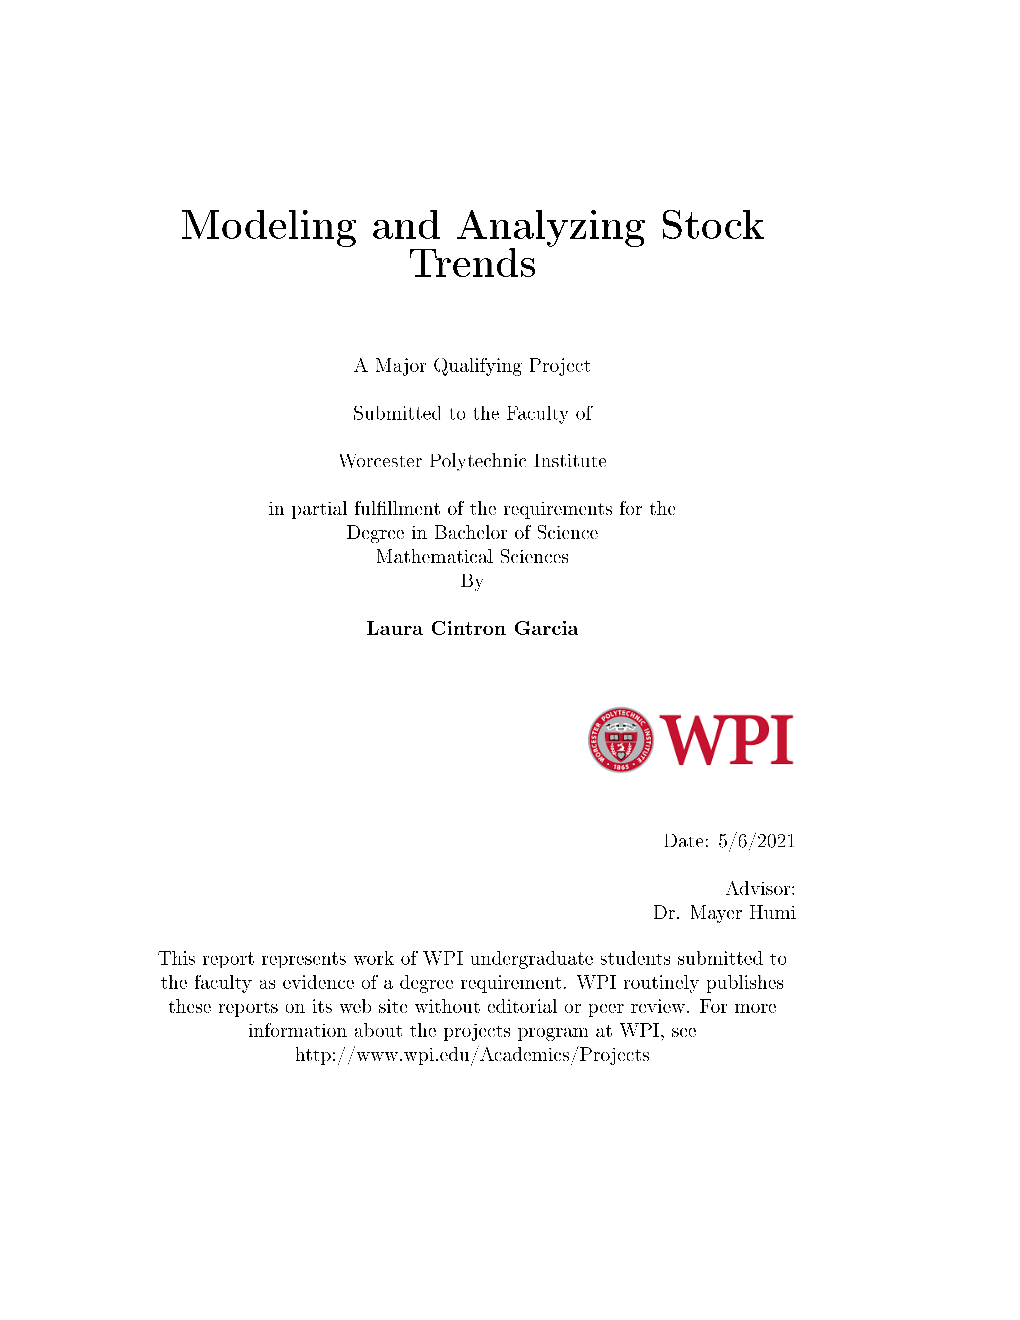 Modeling and Analyzing Stock Trends